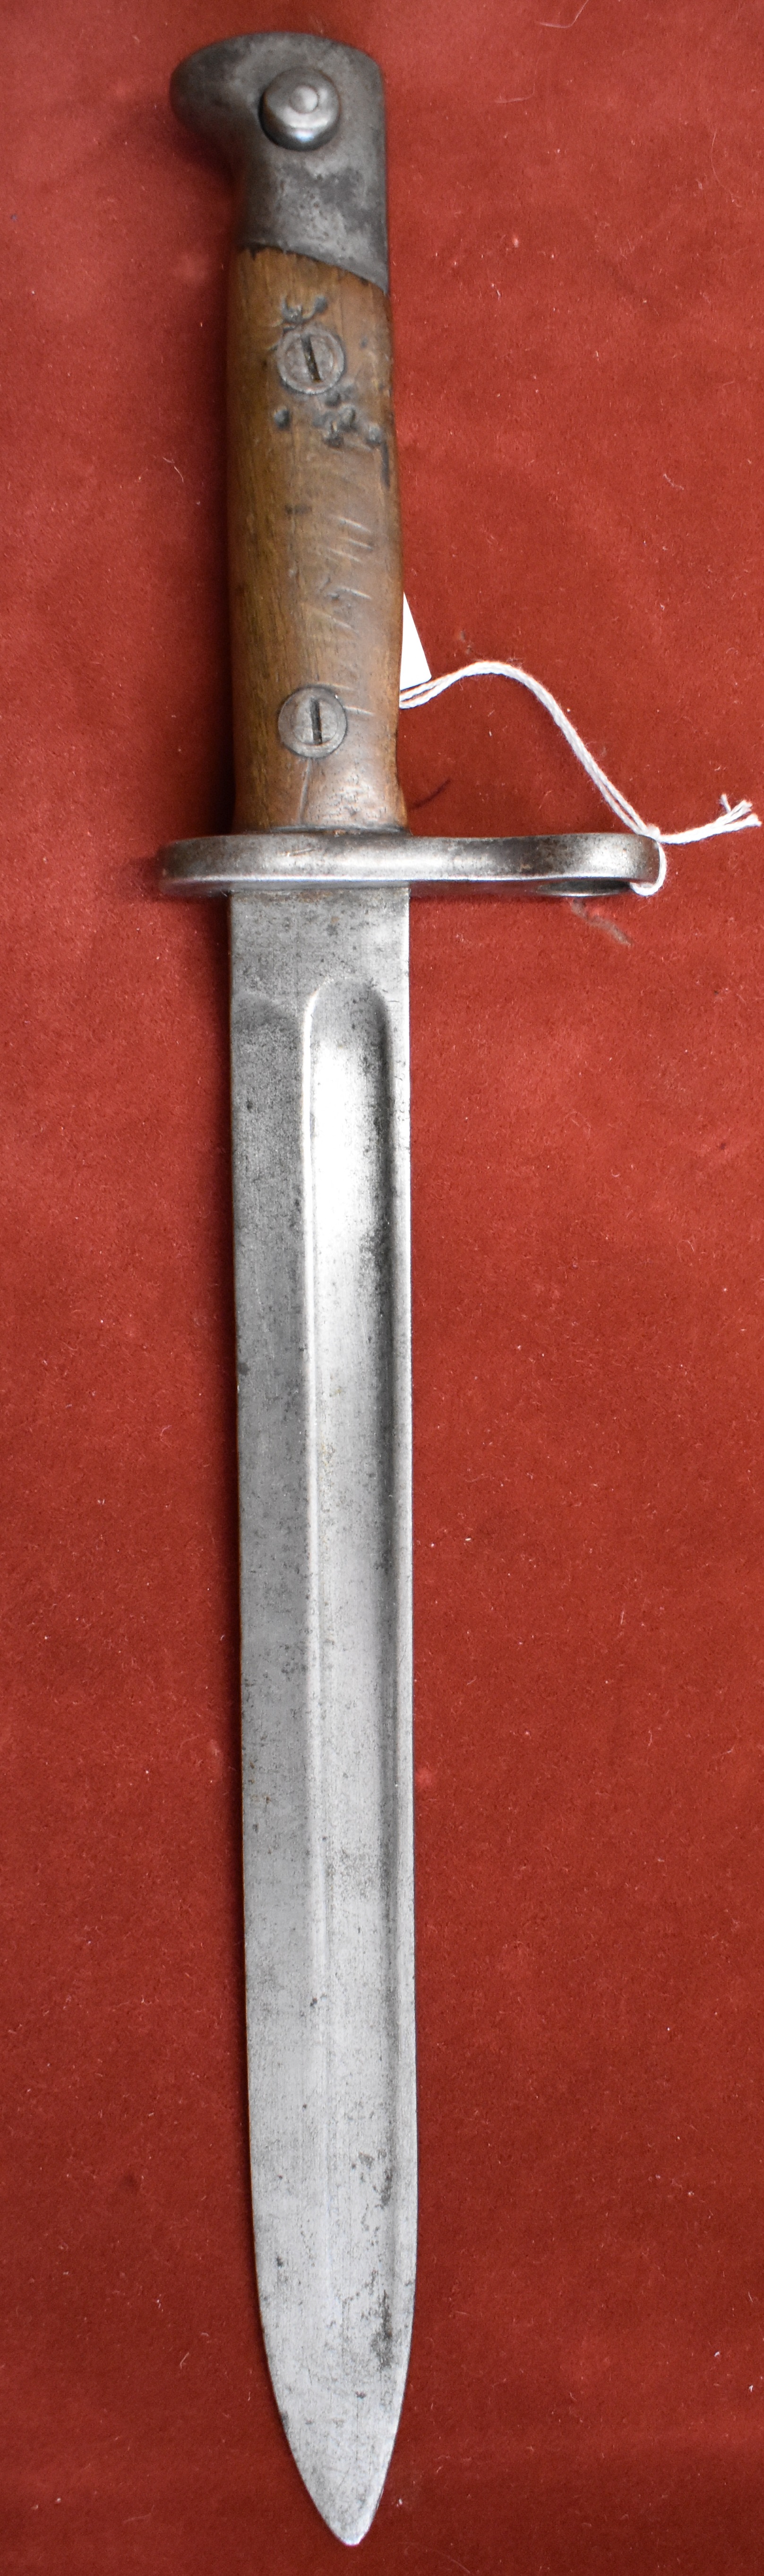 Spanish M1893 Mauser Bayonet, marked on the ricasso 'Simpson & Co, Suhl' and stamped 1409 on the